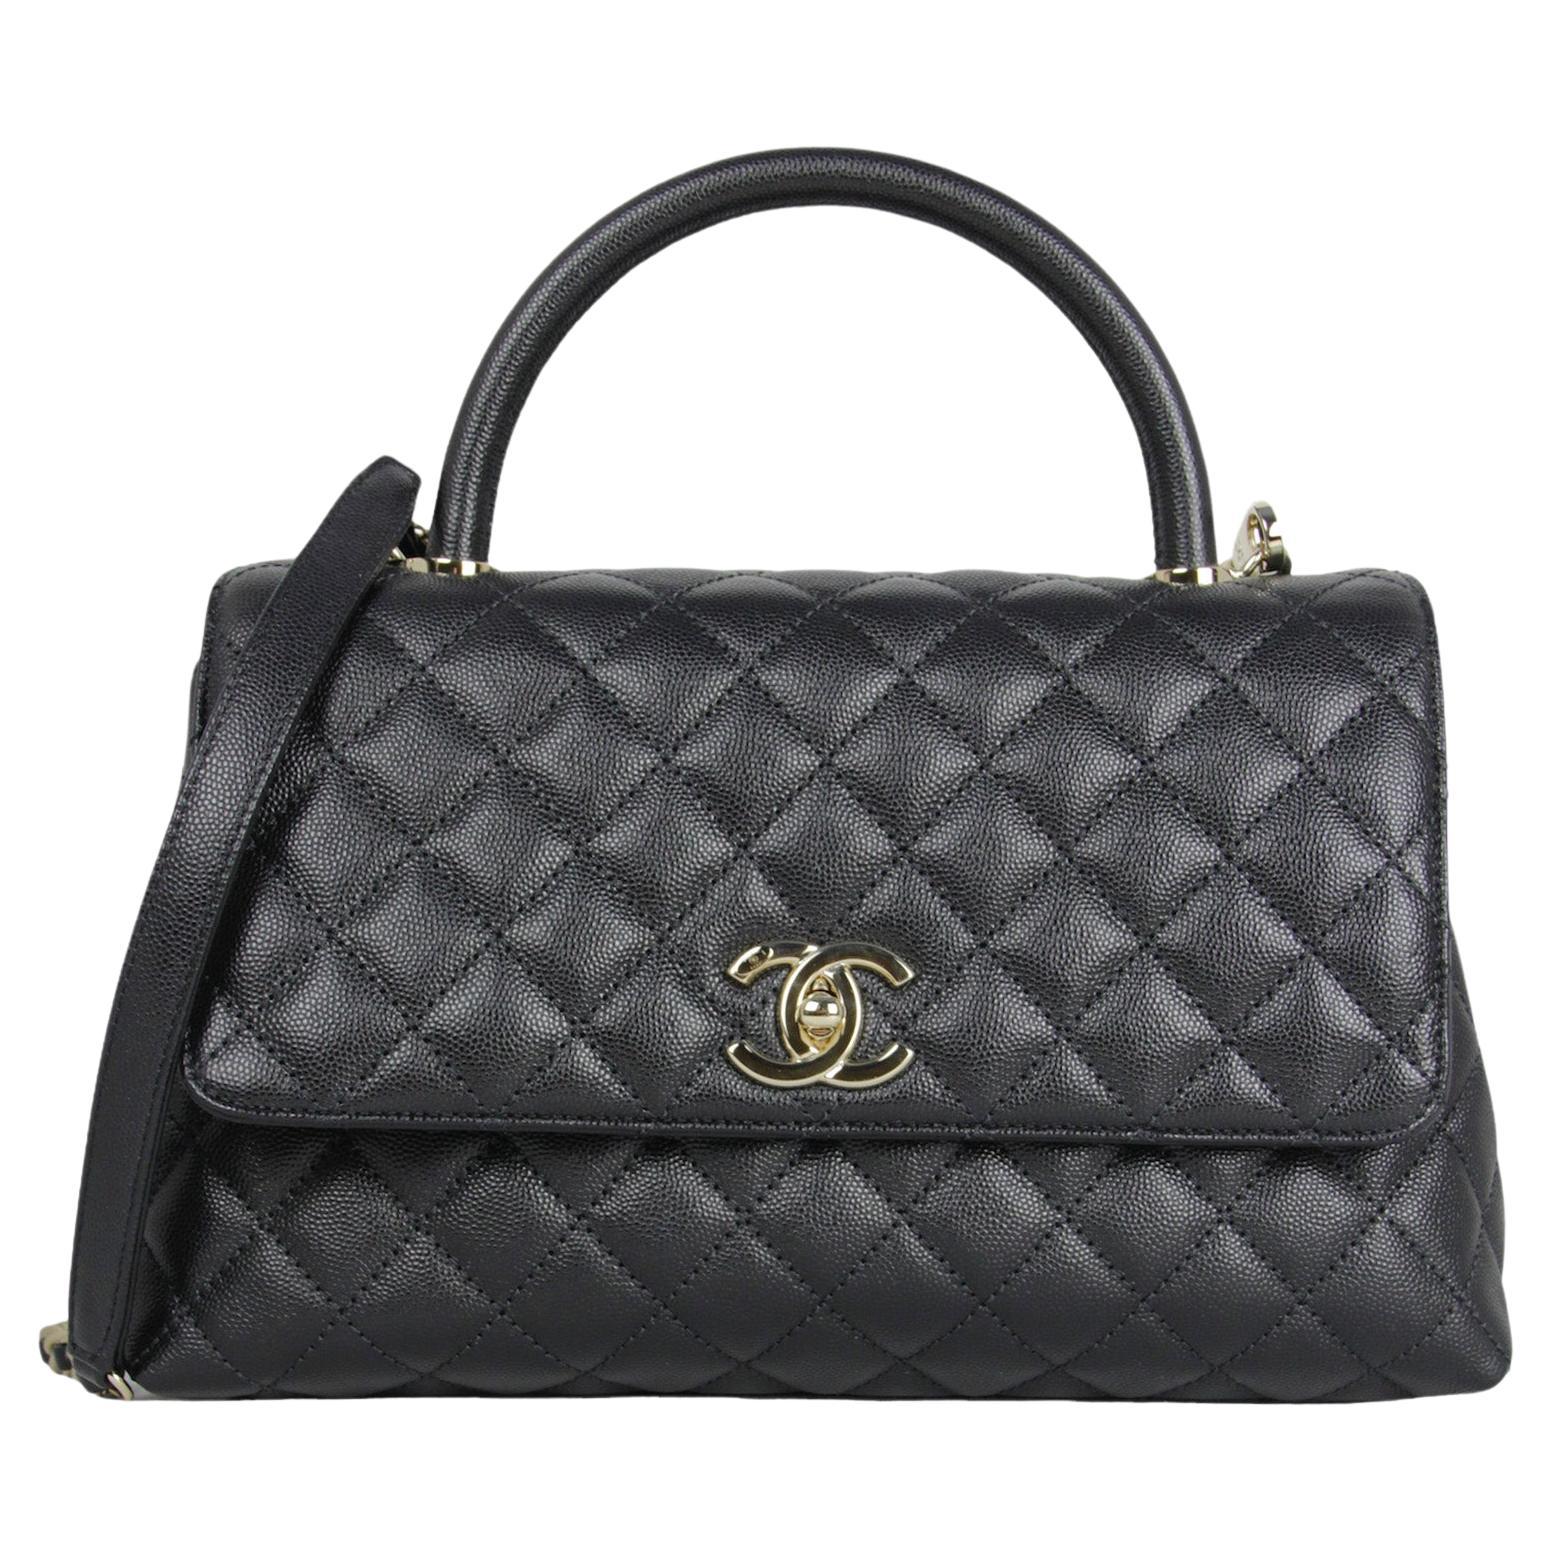 Chanel Black Caviar Leather Quilted Small Coco Handle Bag Flap Bag For Sale